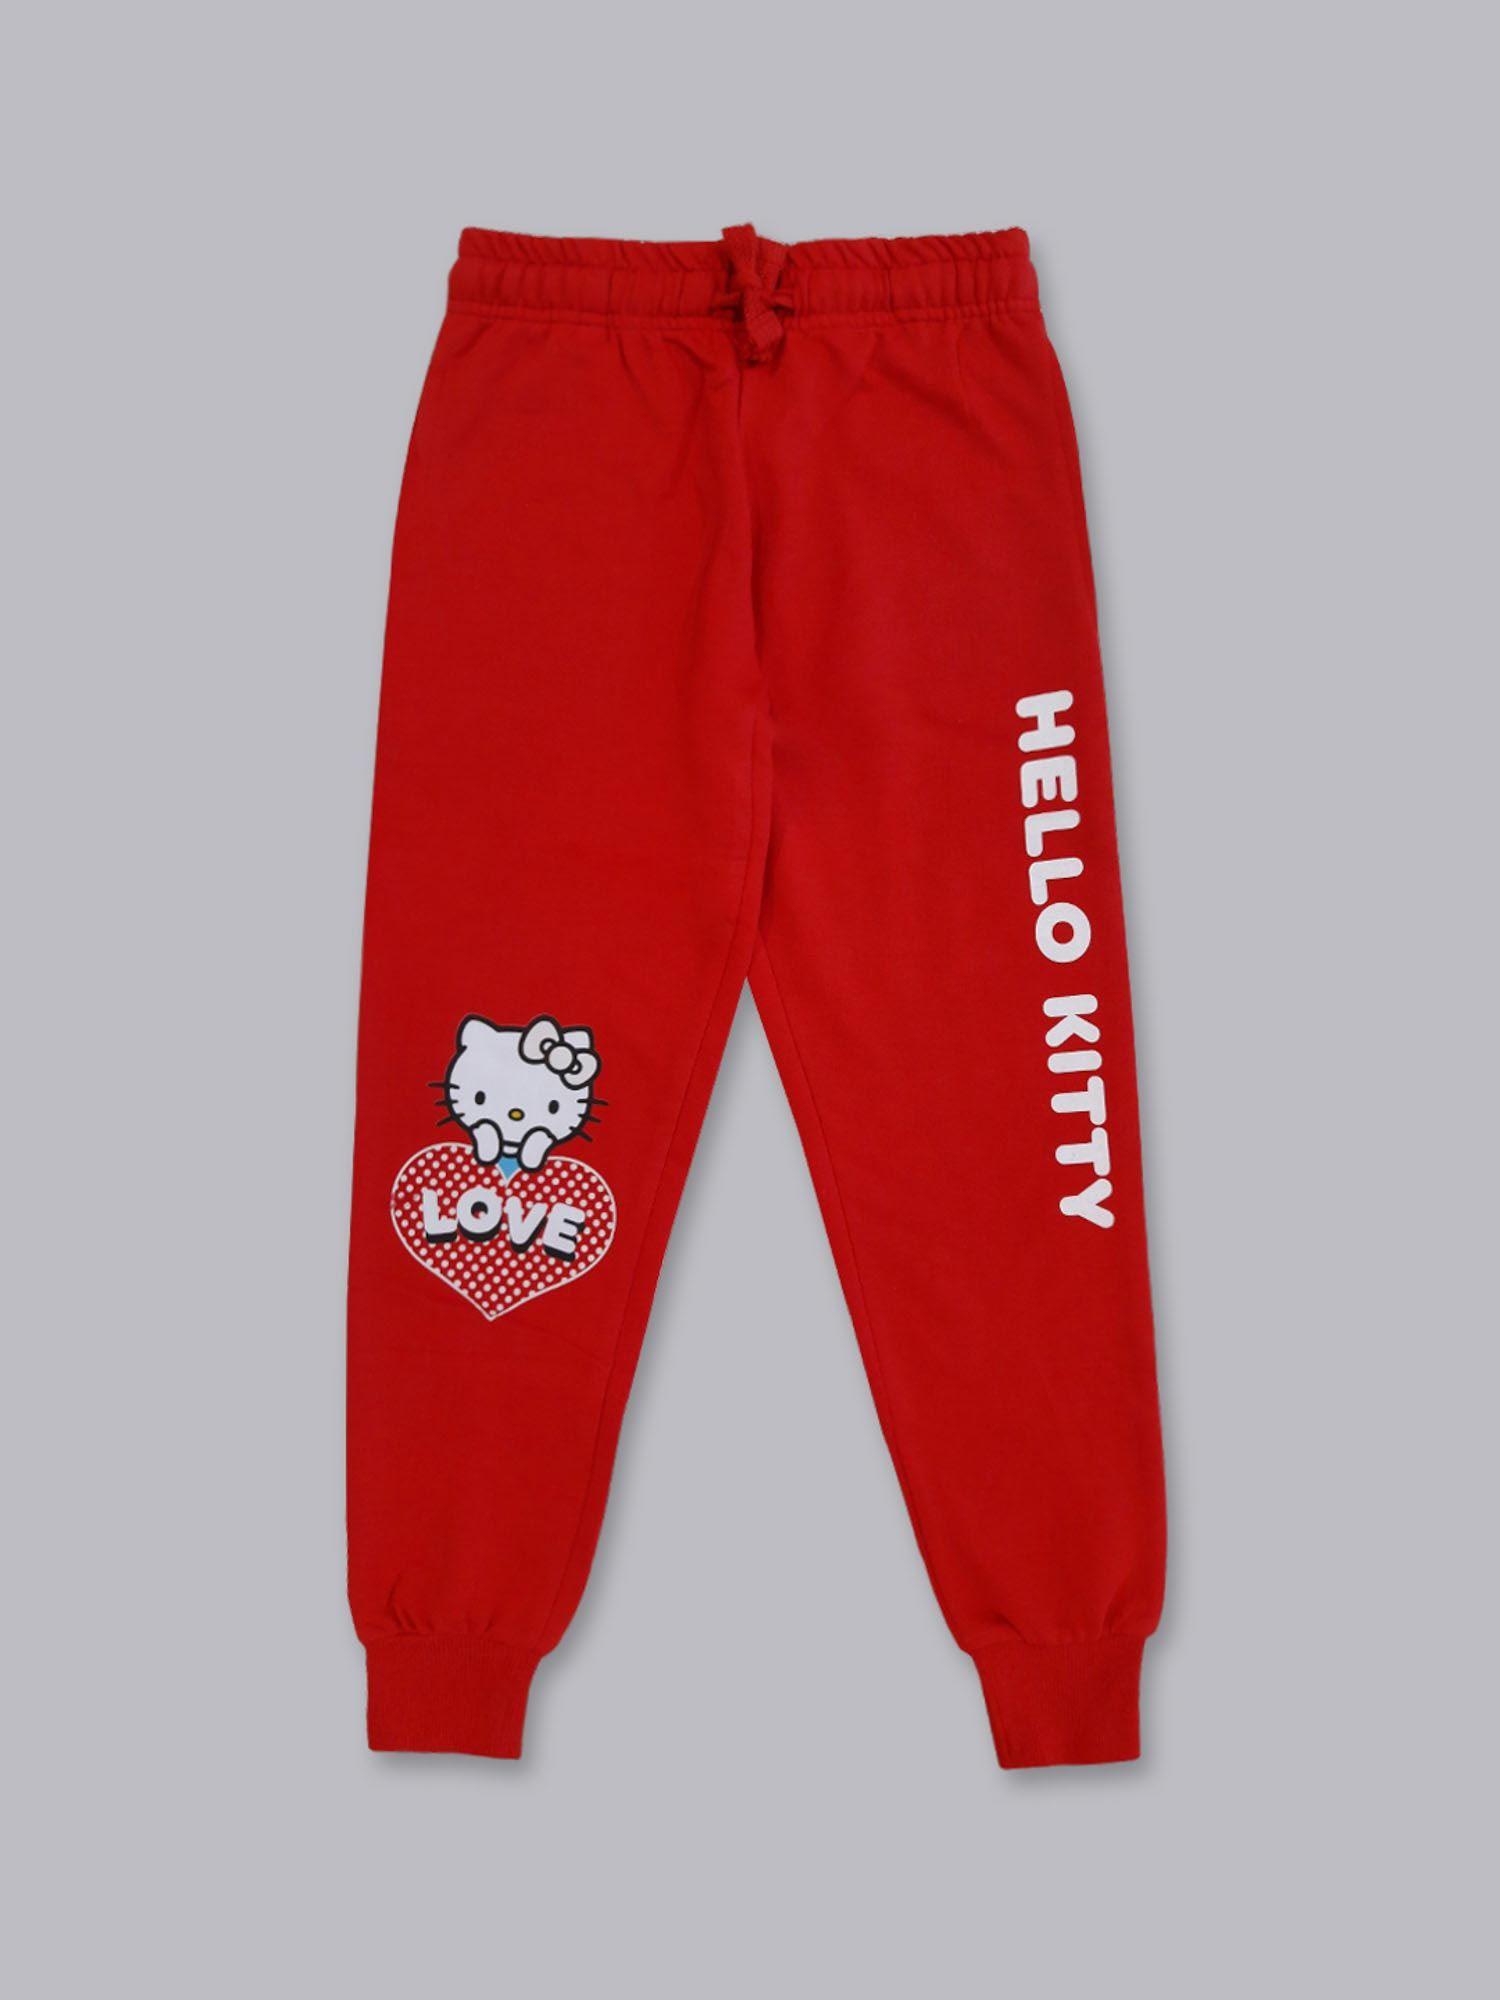 hello kitty featured joggers for girls